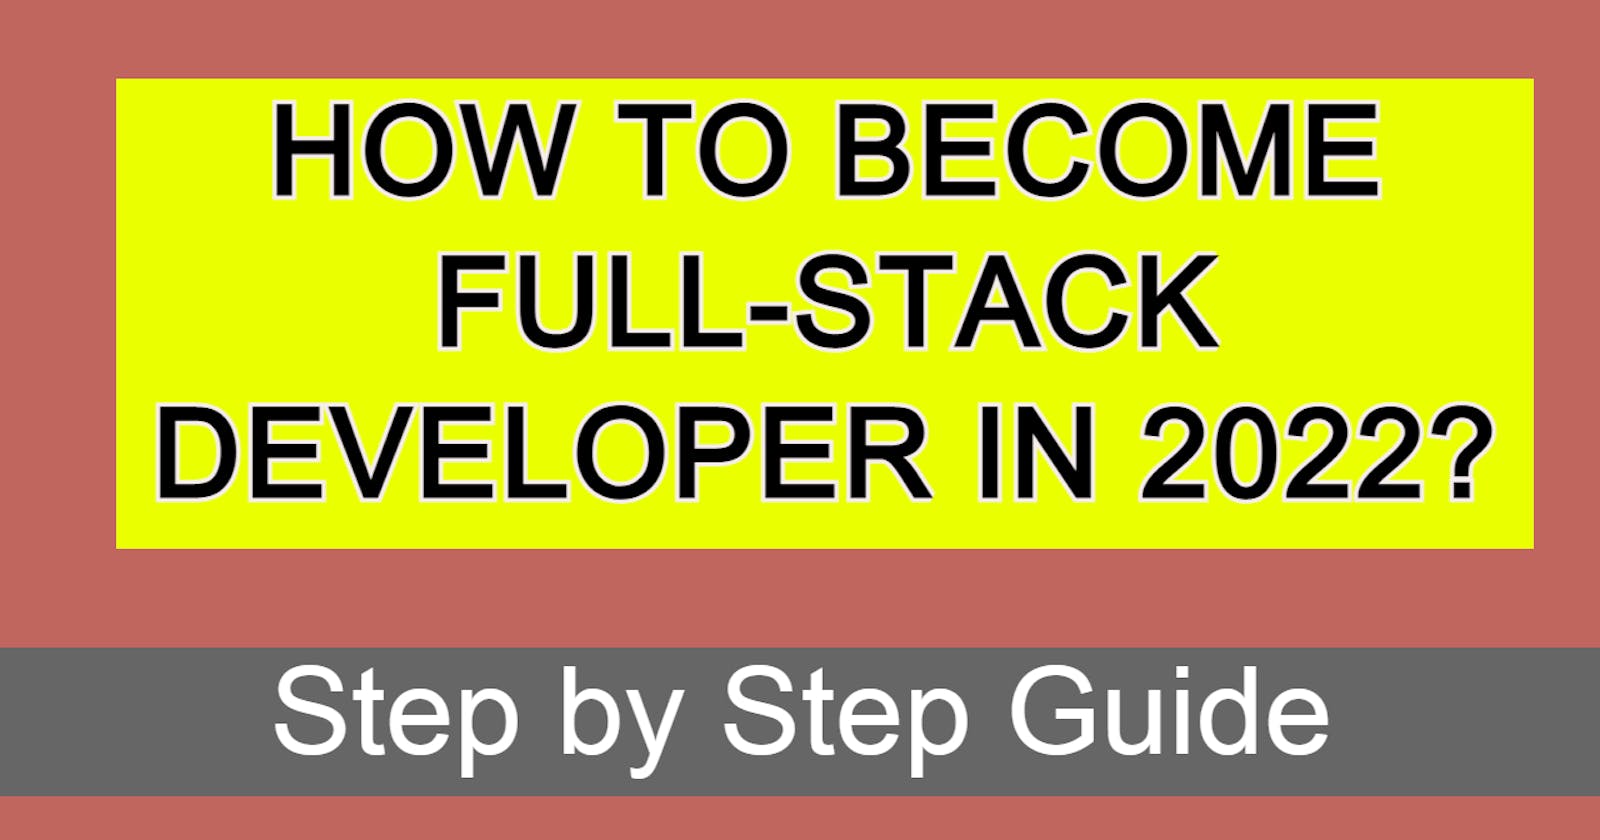 How to Become a Full Stack Developer in 2022 (Step-by-Step Guide)